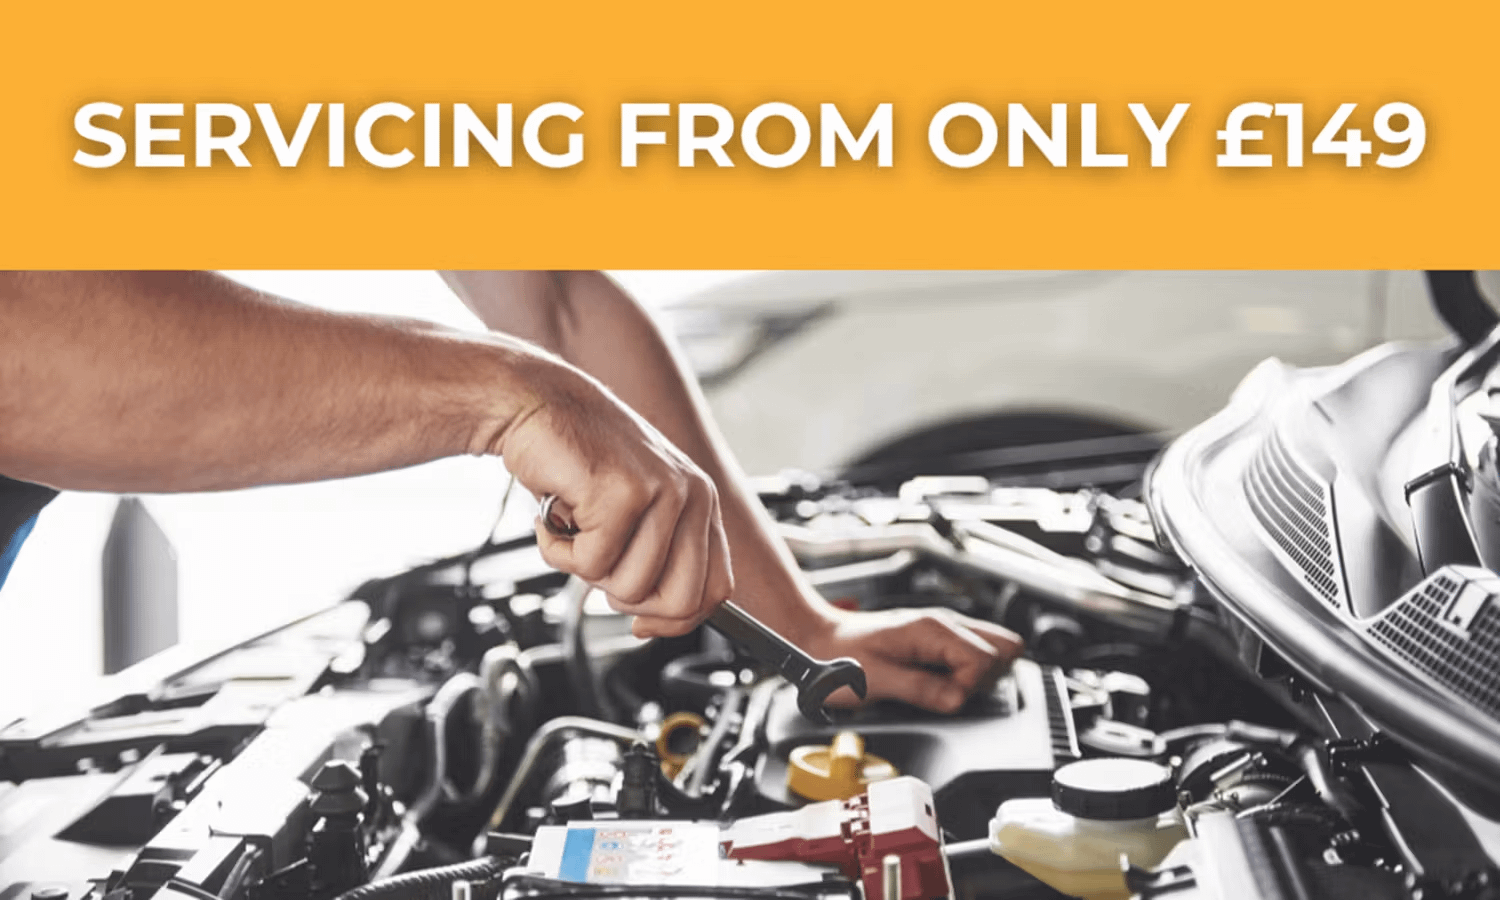 Vehicle Servicing From £149